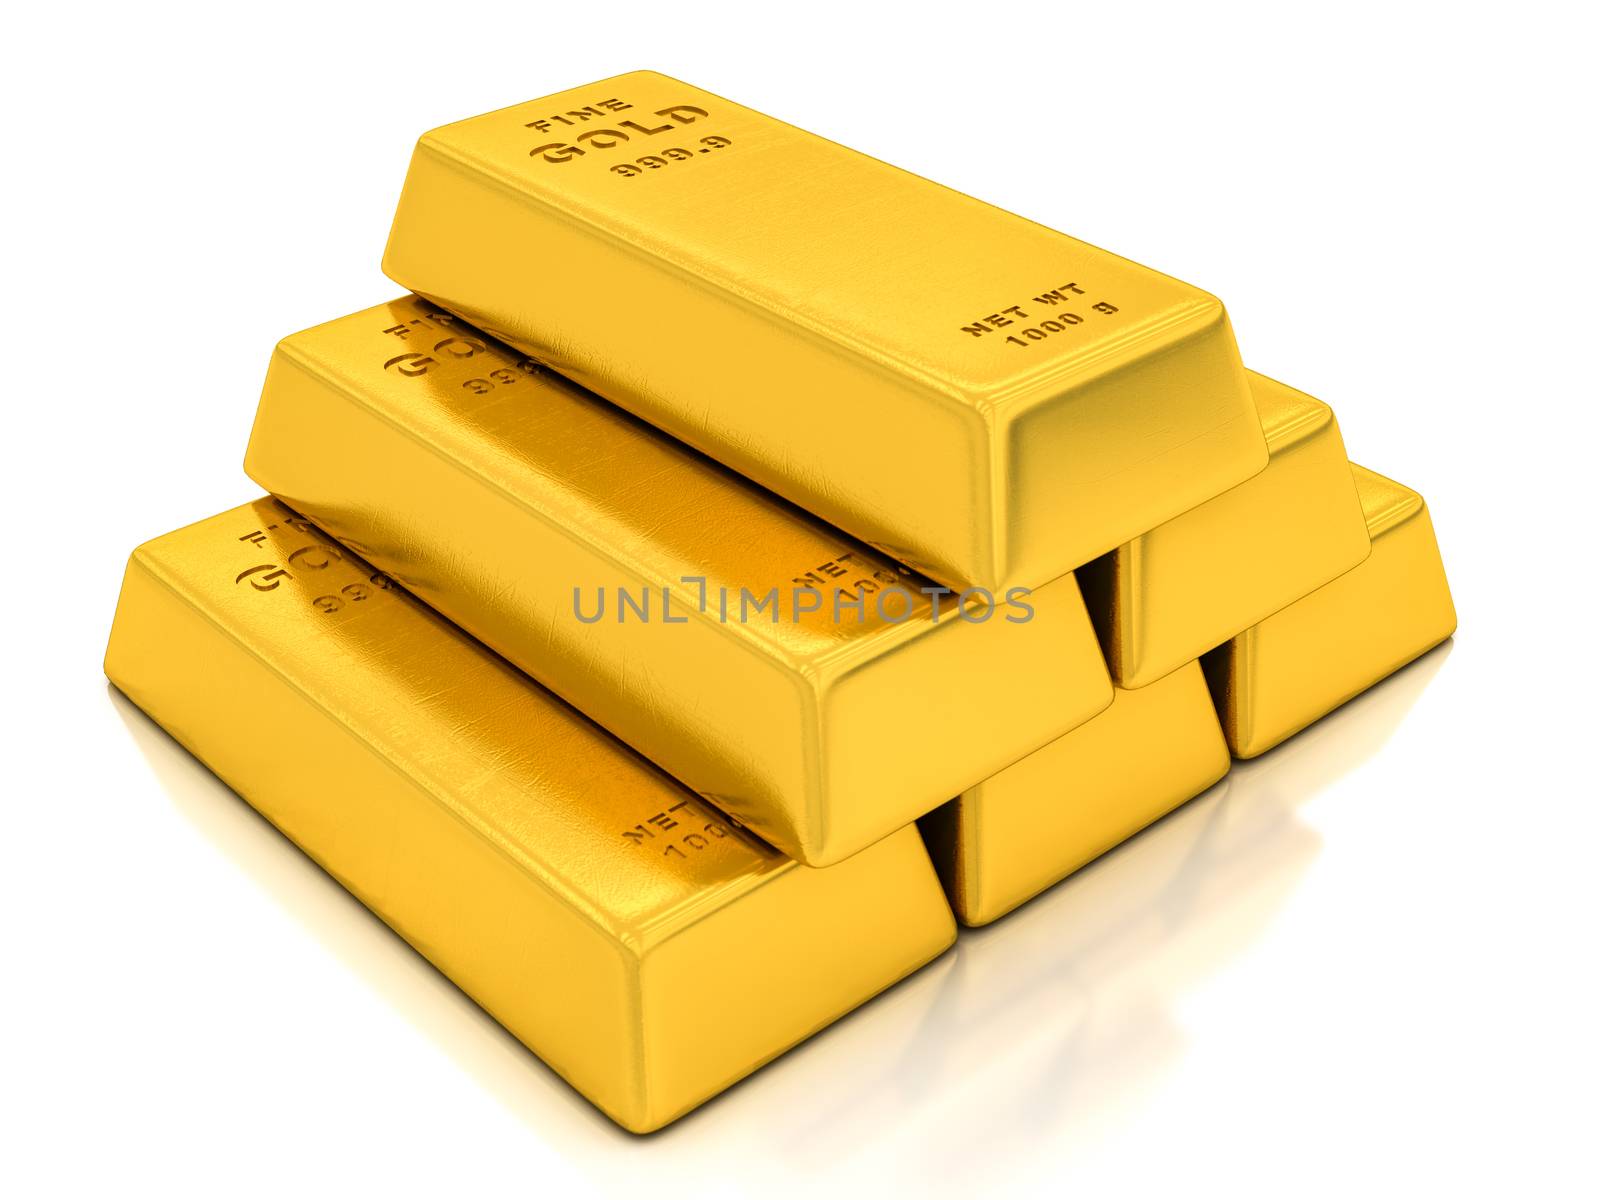 gold ingots by Lupen